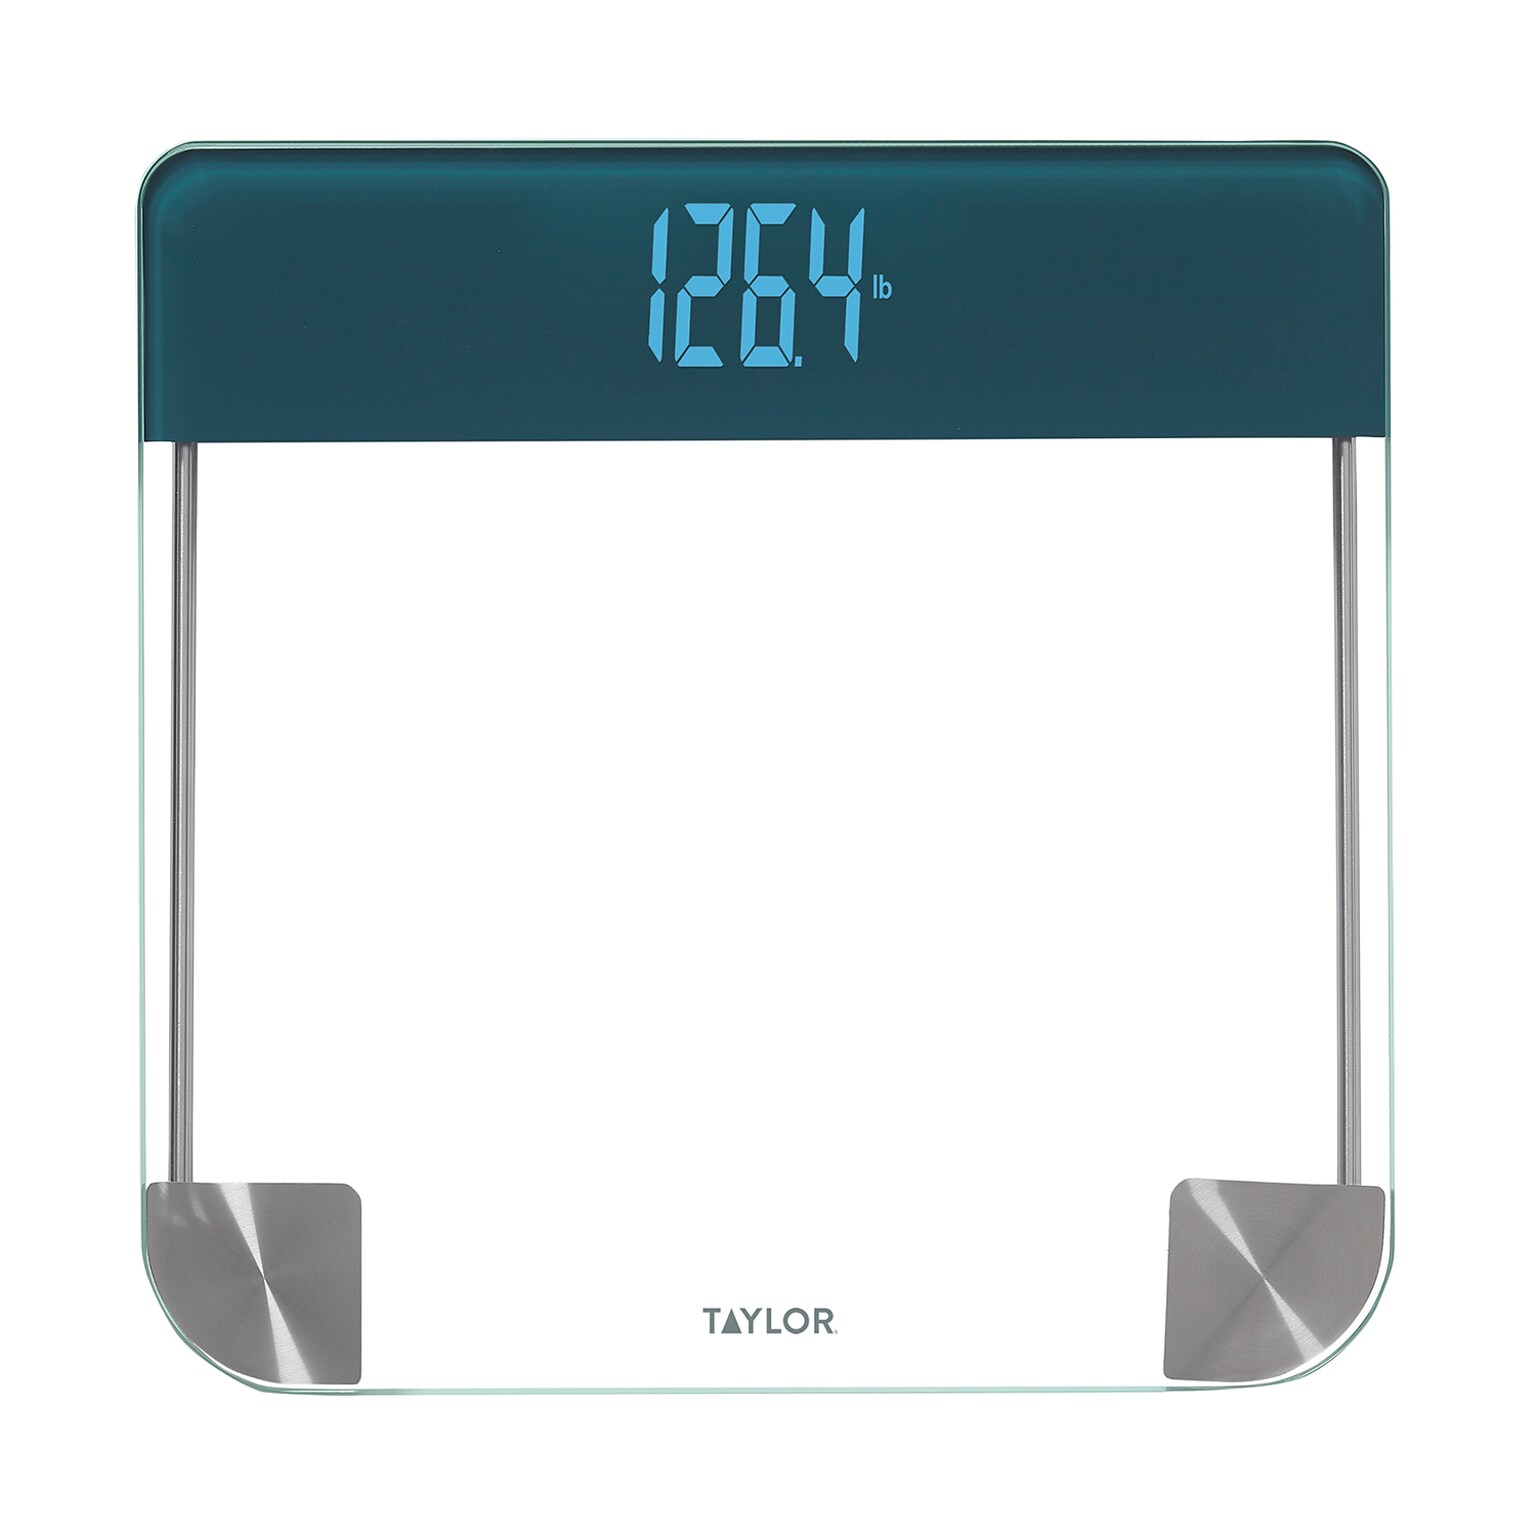 Taylor Precision Products 5283752 Glass Bath Scale with Magic Display, Clear, 440 lbs.